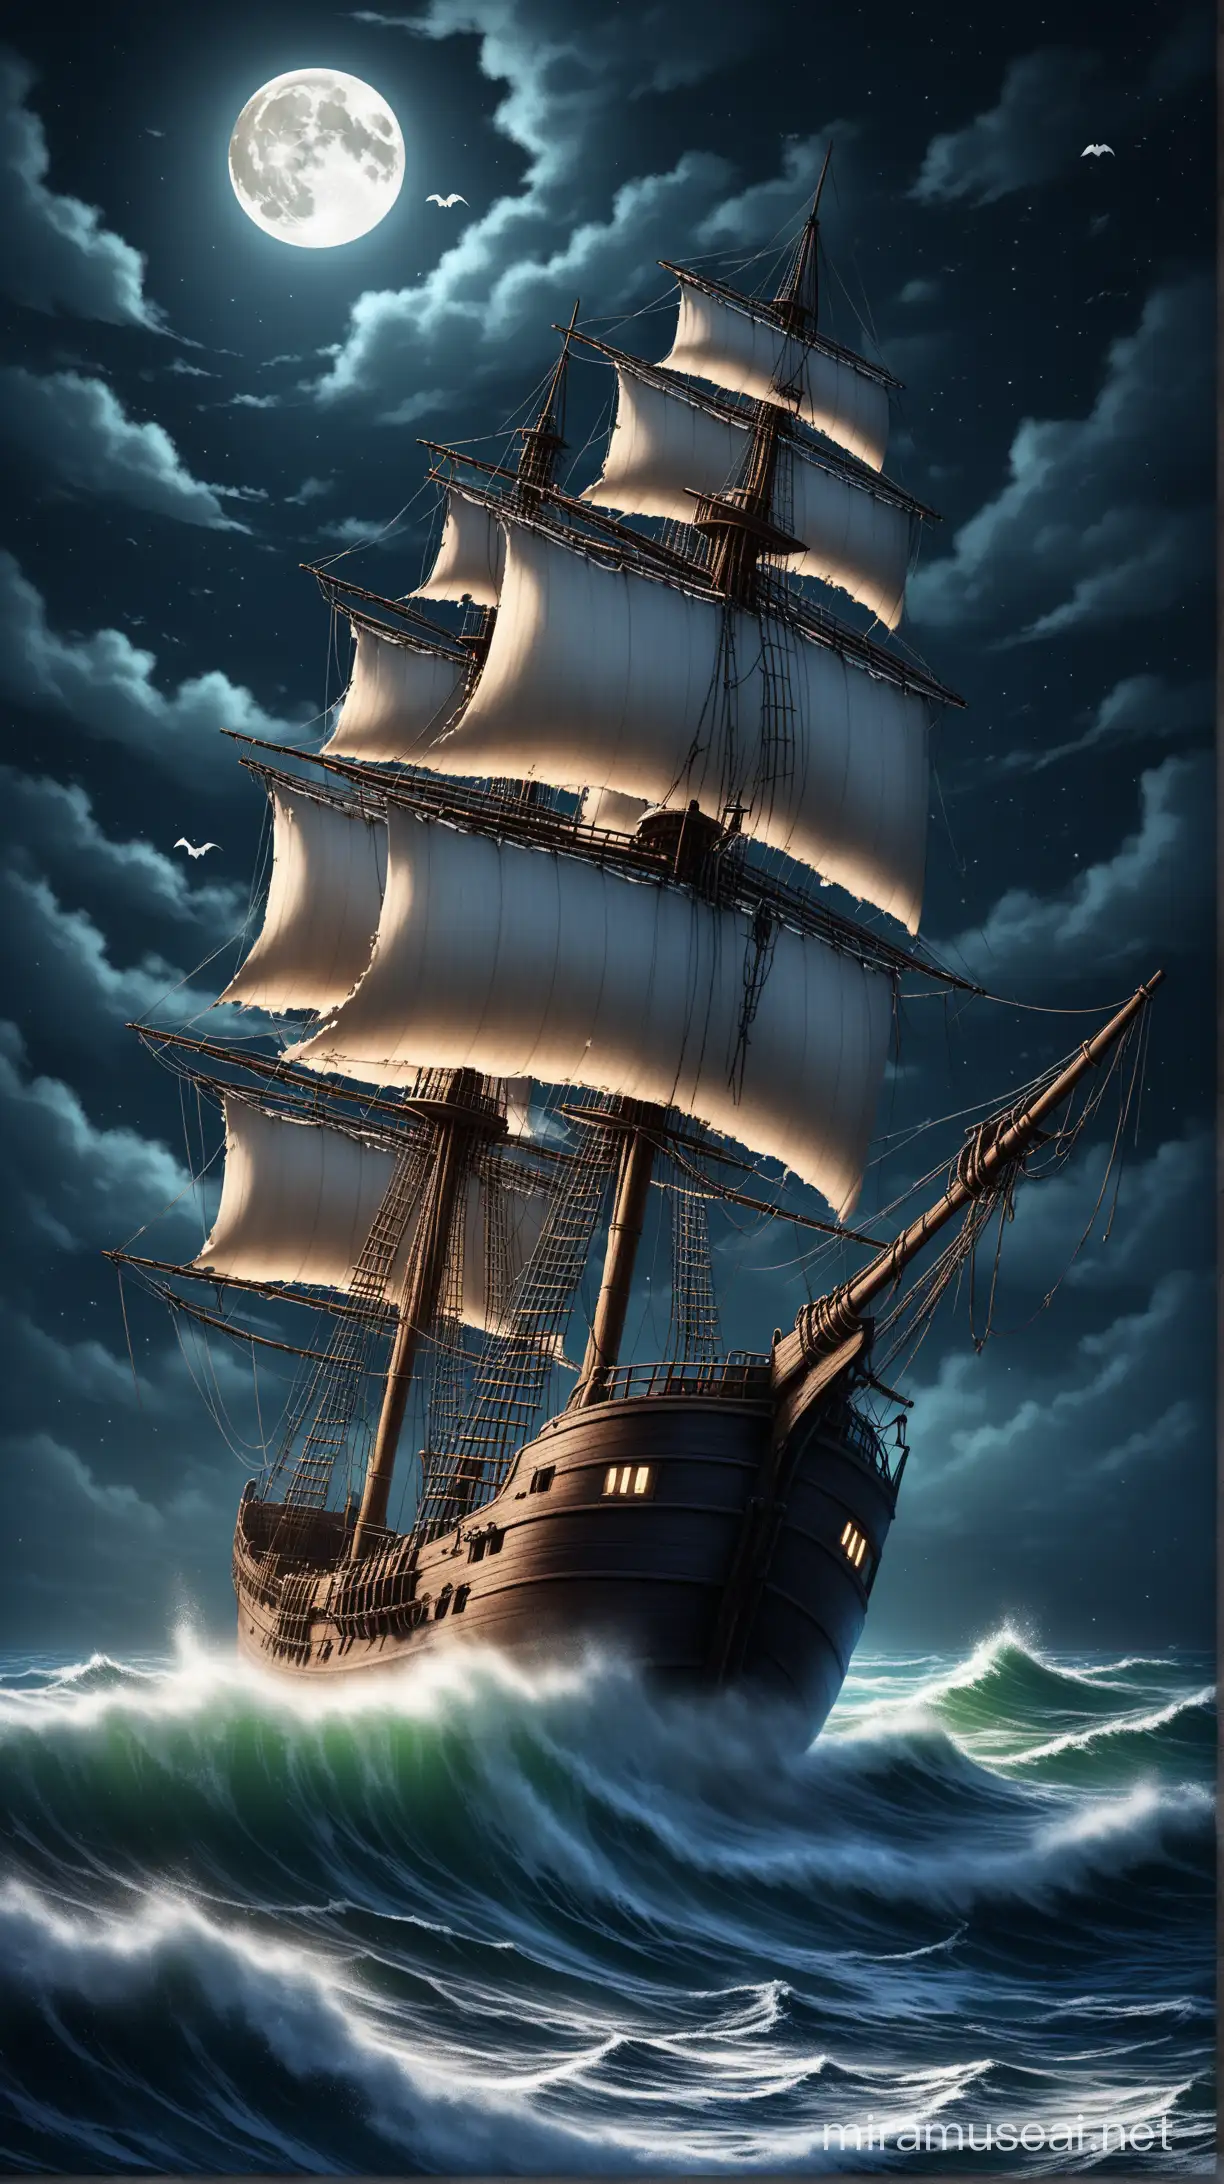 an old rigging, torn sails, ghost ship, in the night, rough sea, waves, foam, moon, photography, realistic